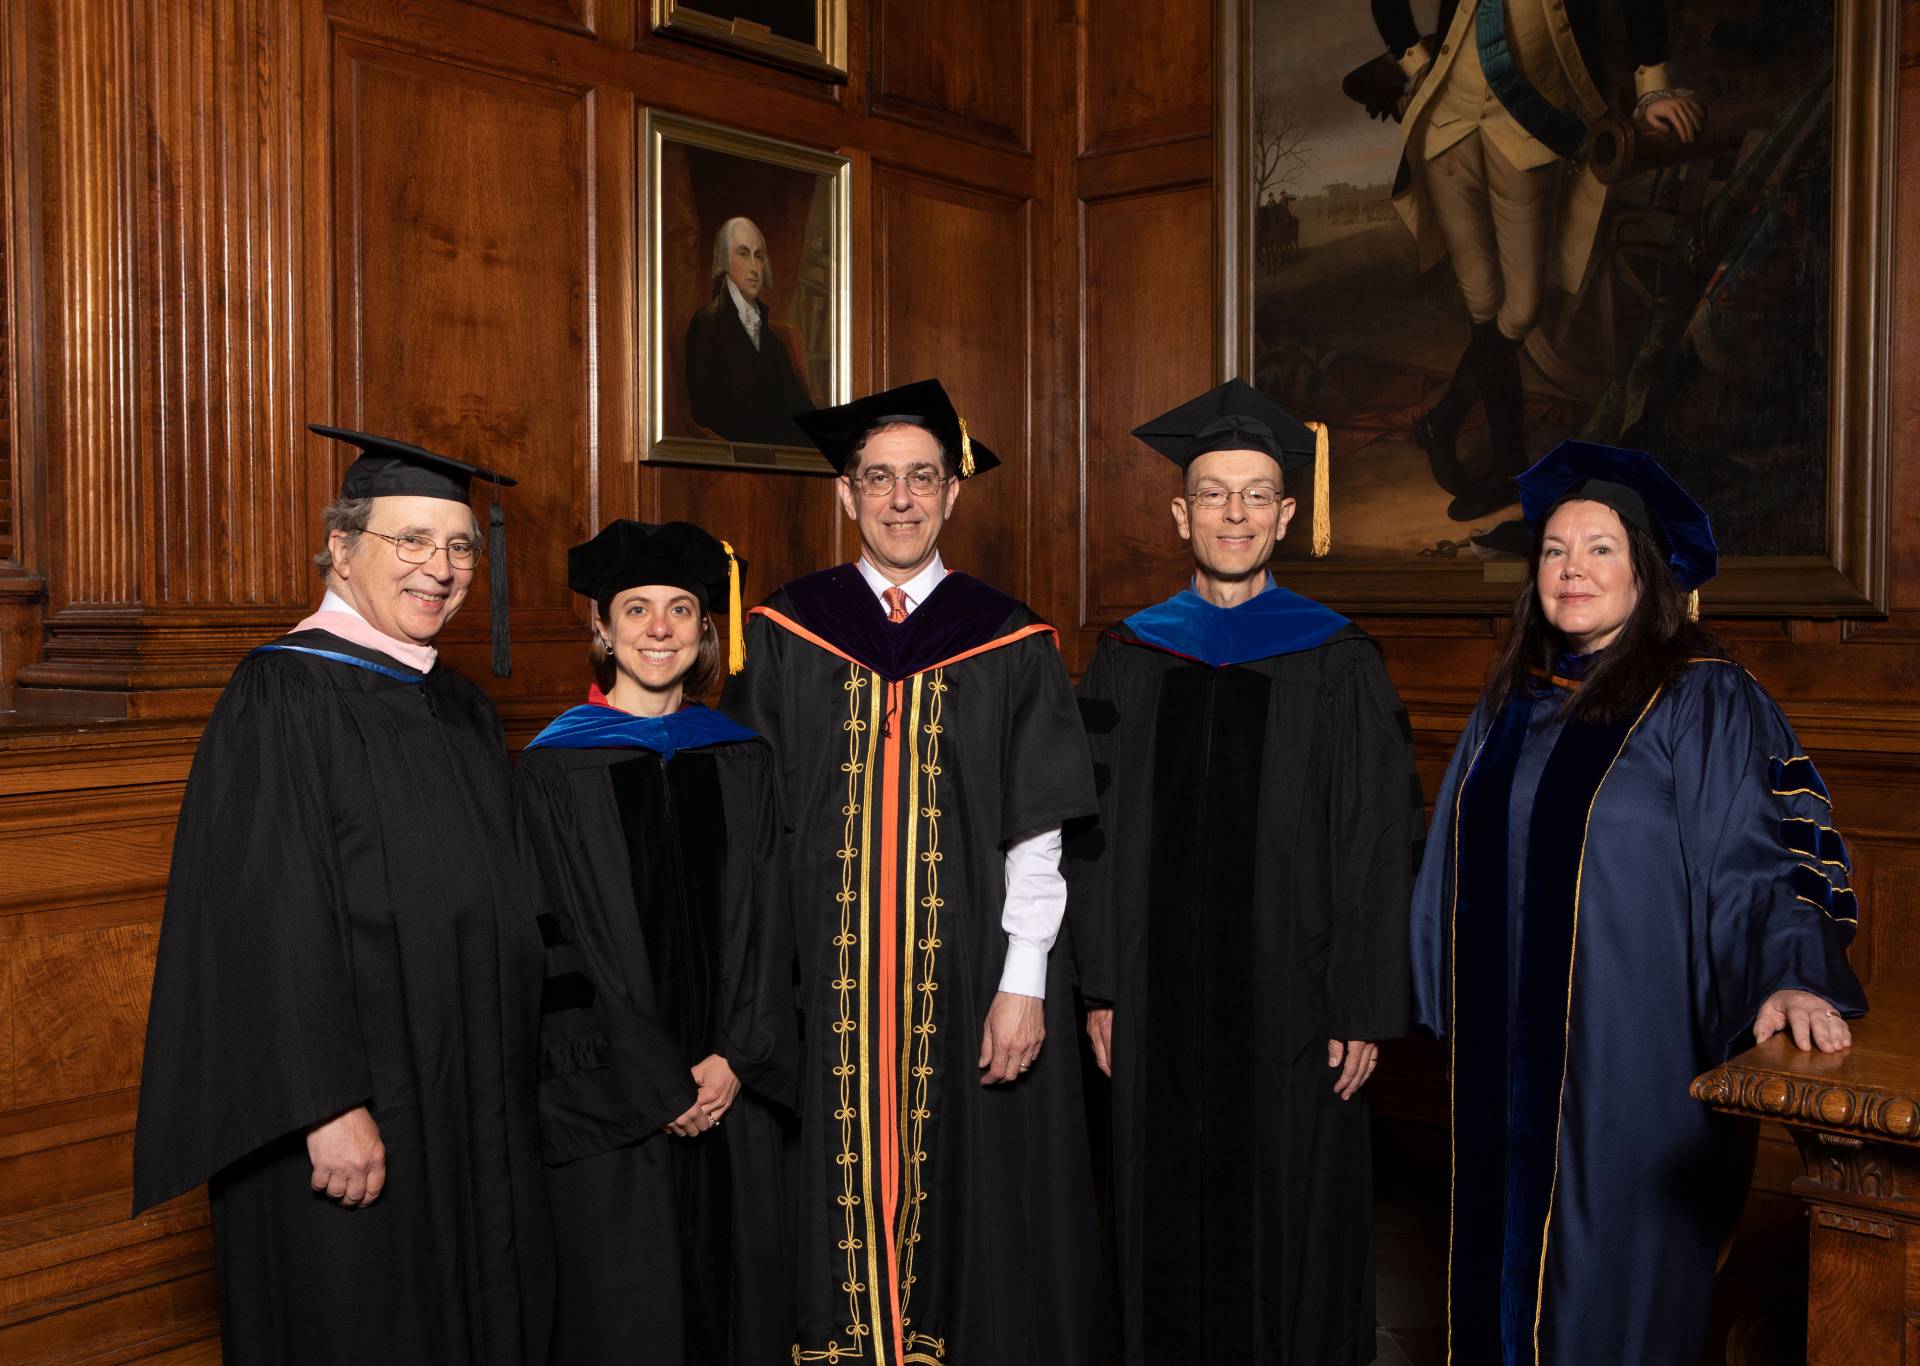 Recipients of faculty teaching awards pose in their ceremonial robes and mortarboards